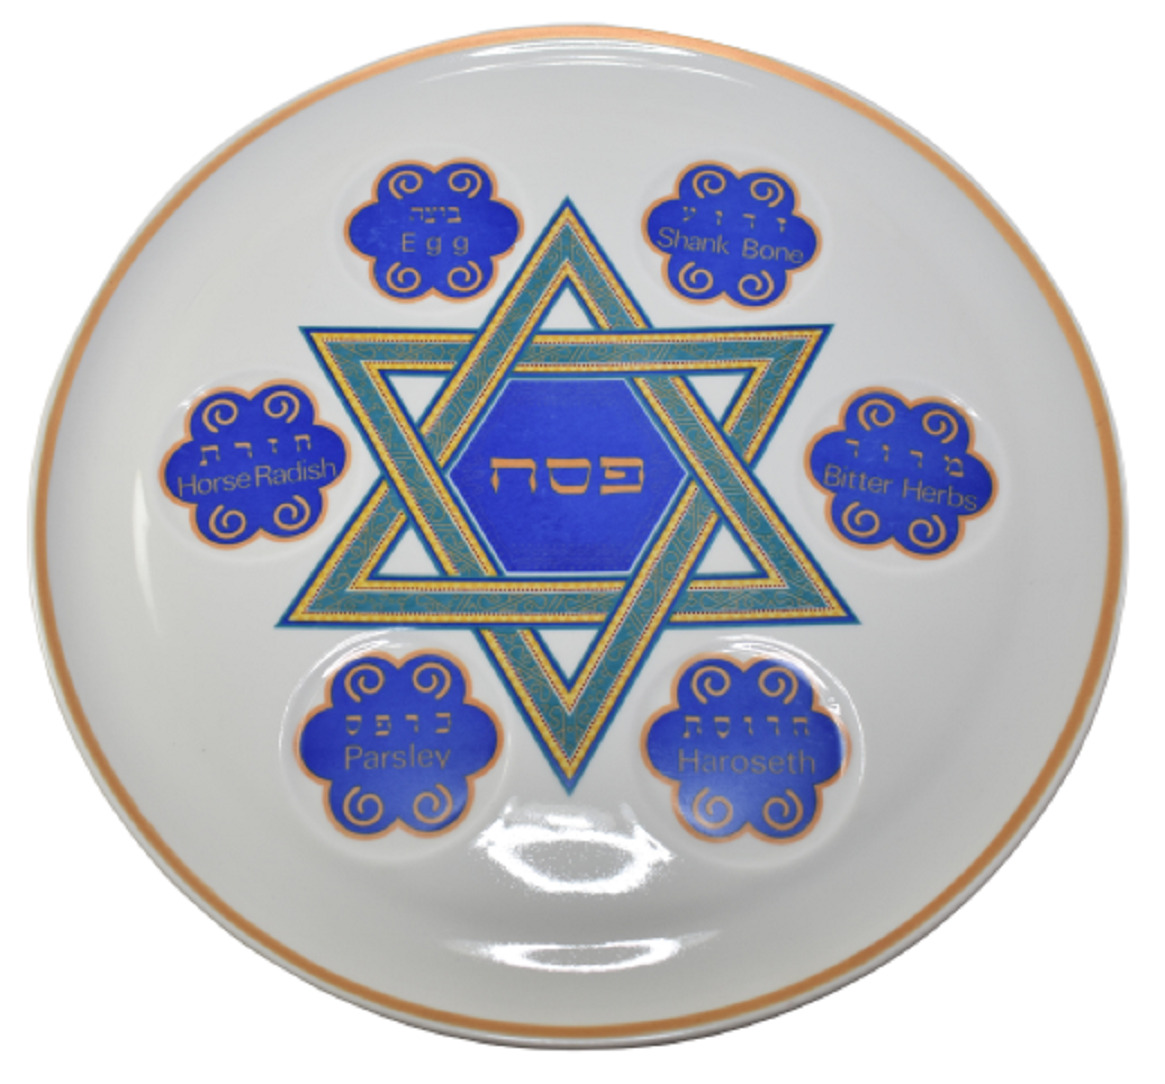 Vintage Classic Large Ceramic Passover Pesach Plate - Naama Fine China - Israel